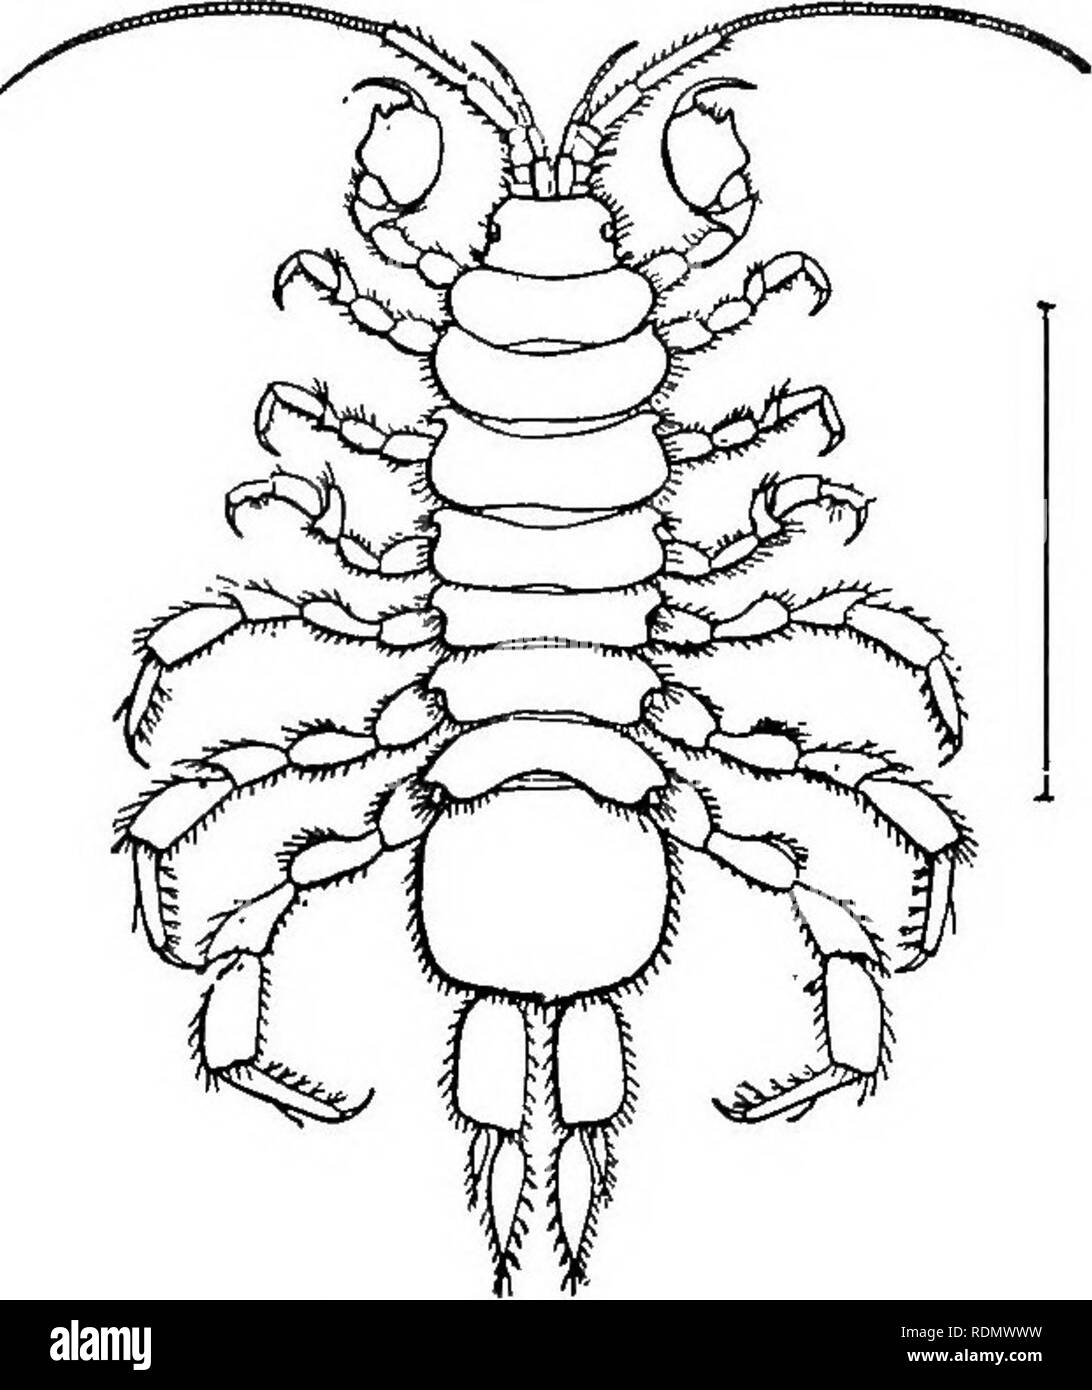 . Higher Crustacea of New York city. Crustacea. i78 NEW YORK STATE MUSEUM. Asellus communis Say A sell us communis Say, T. I. c. 1818. 1:427. DeKay. /. c. 1844. p.49. Smith, S. I. U. S. Fish Com. Rep't for 1872-73. 1874. P-6S7. plr. fig.4. Richardson. /. c. igoi. p.SSi. A fresh-water form. Body with sides parallel. Anten- nulae short and flagellum with several segments. An- tennae more than half length of body. First pair of legs of male chelate, last three pairs longer than the preceding. Pleon large, squarish and in one piece; uropoda elongated and flattened. Length 15 mm, breadth 5 mm. Colo Stock Photo